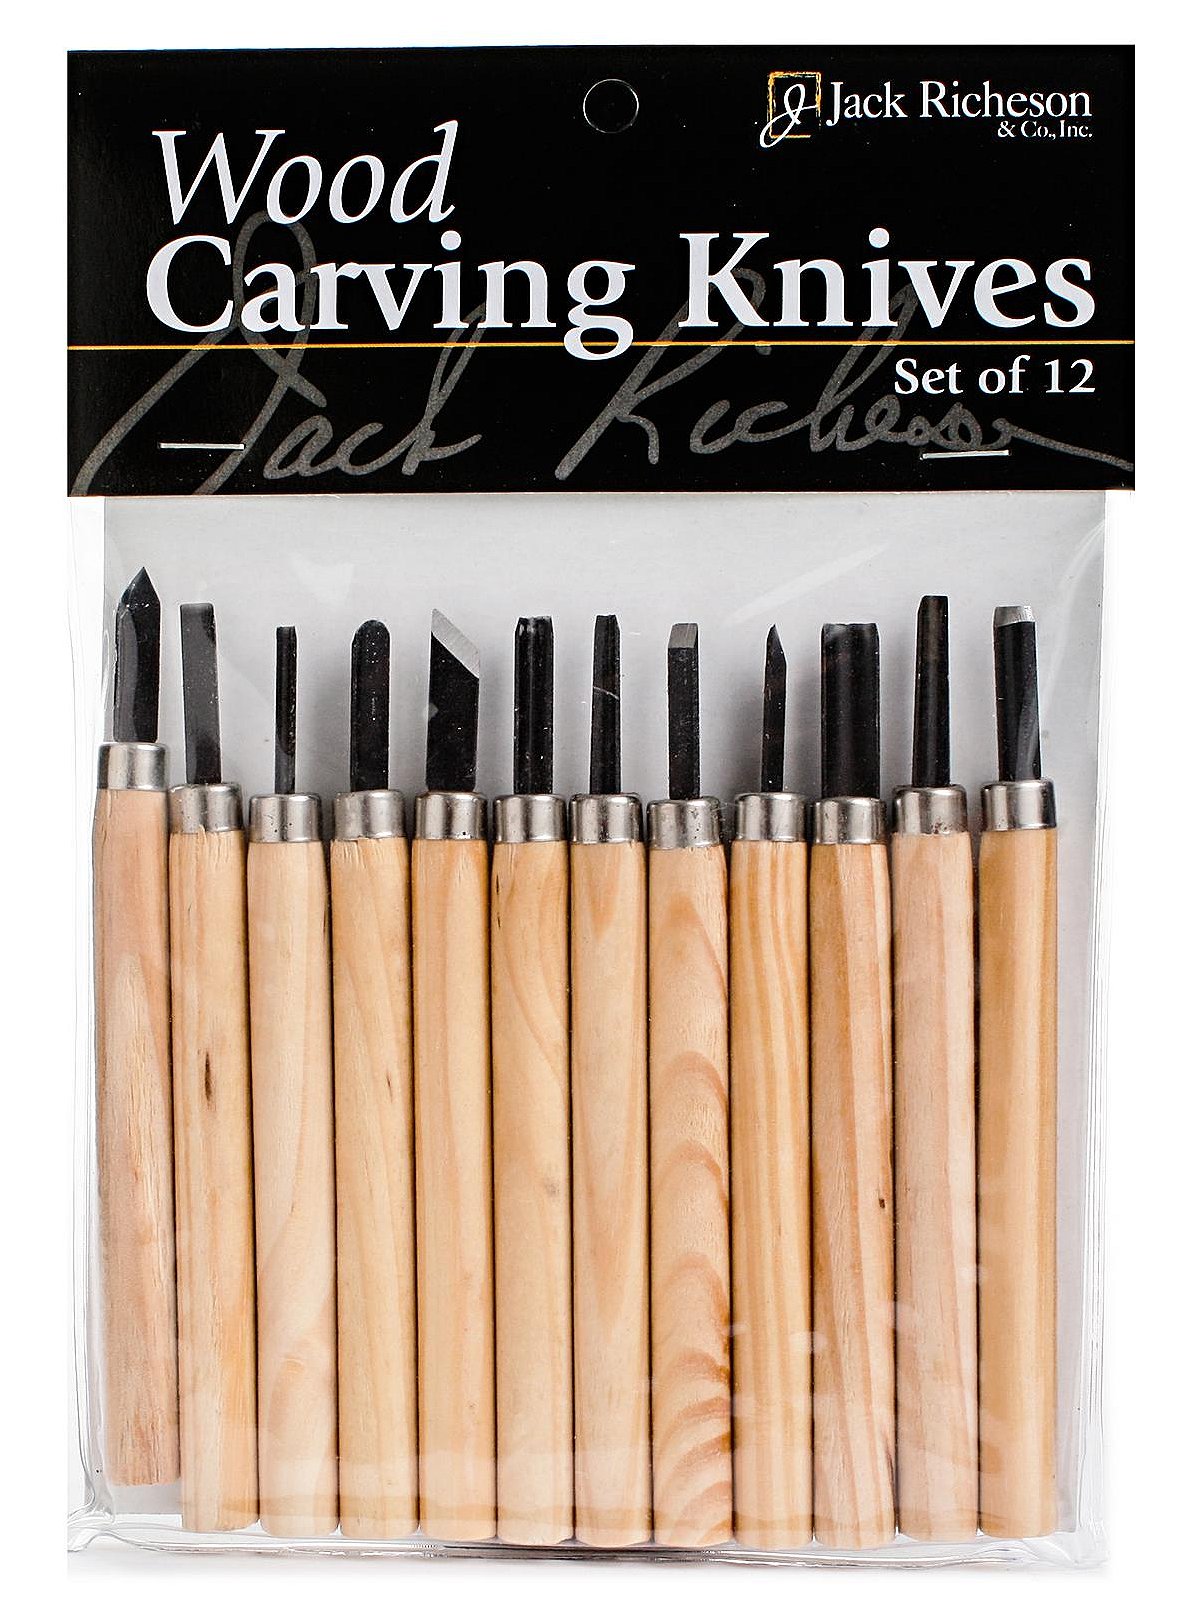 Sharp Tools, Great Value - Woodcarving Illustrated